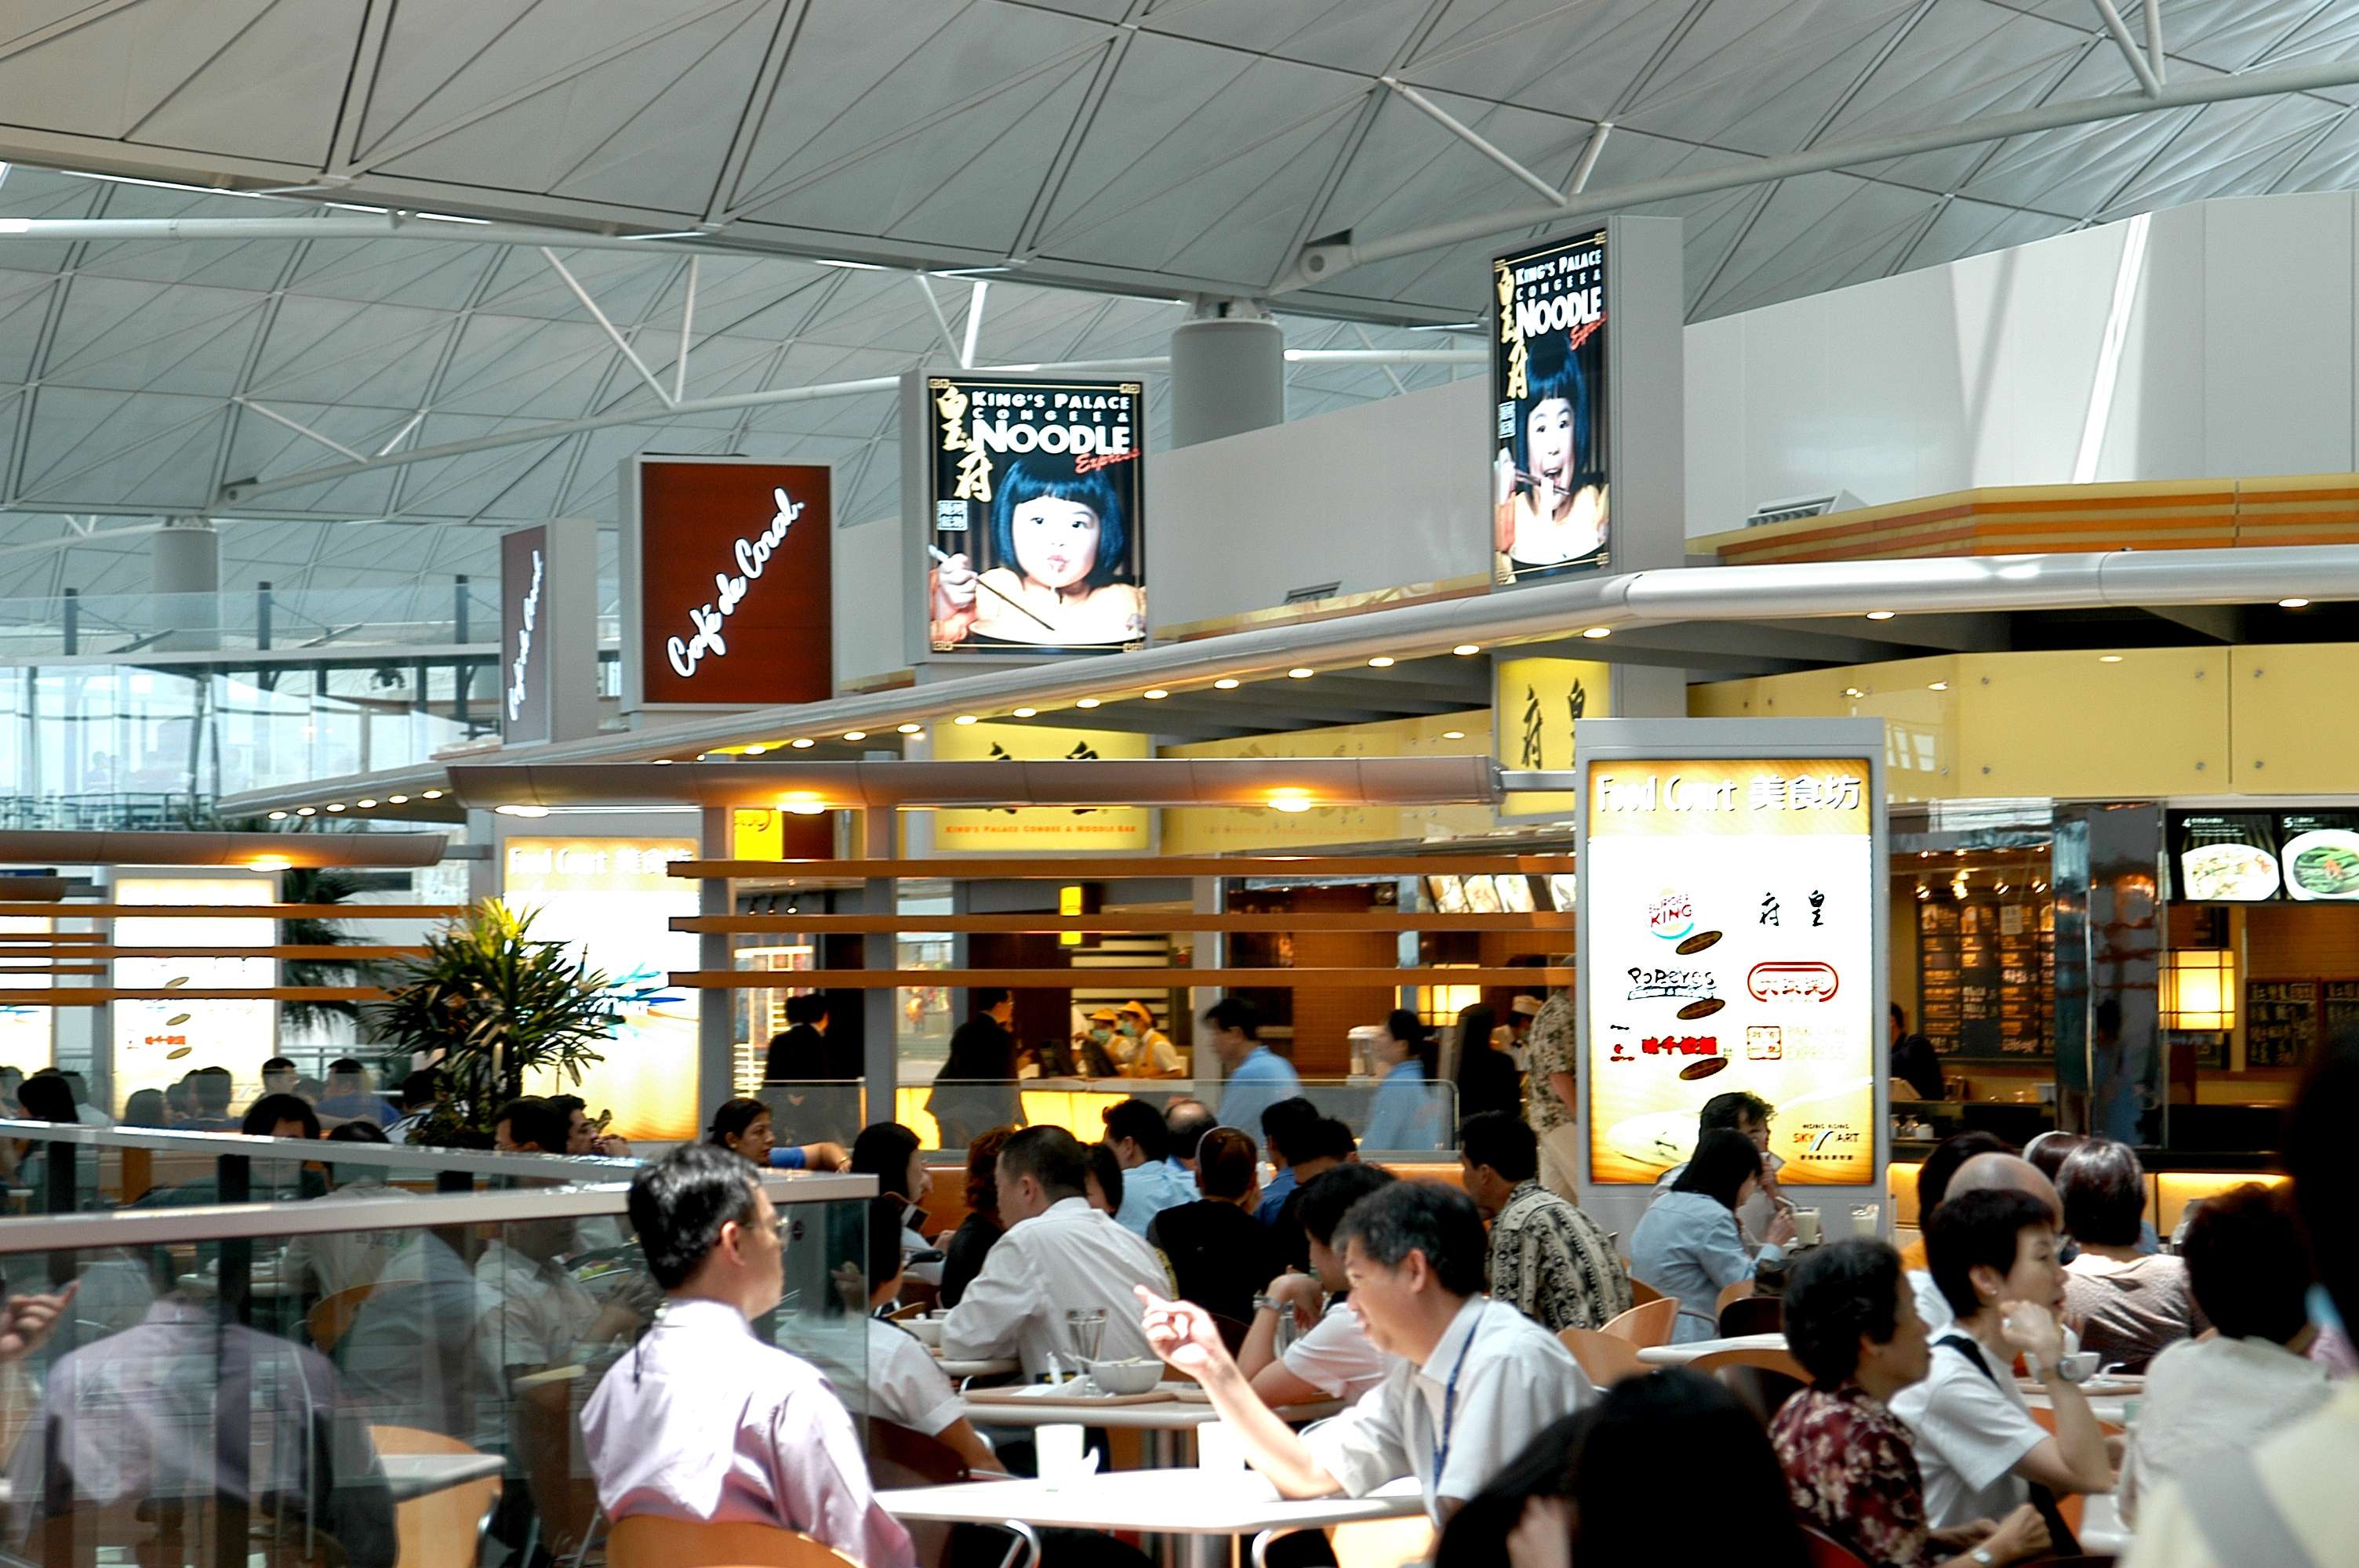 Food outlets at Hong Kong International Airport. Retail licences and advertising revenue represent 41.4 per cent of total revenue at the airport. Photo: handout